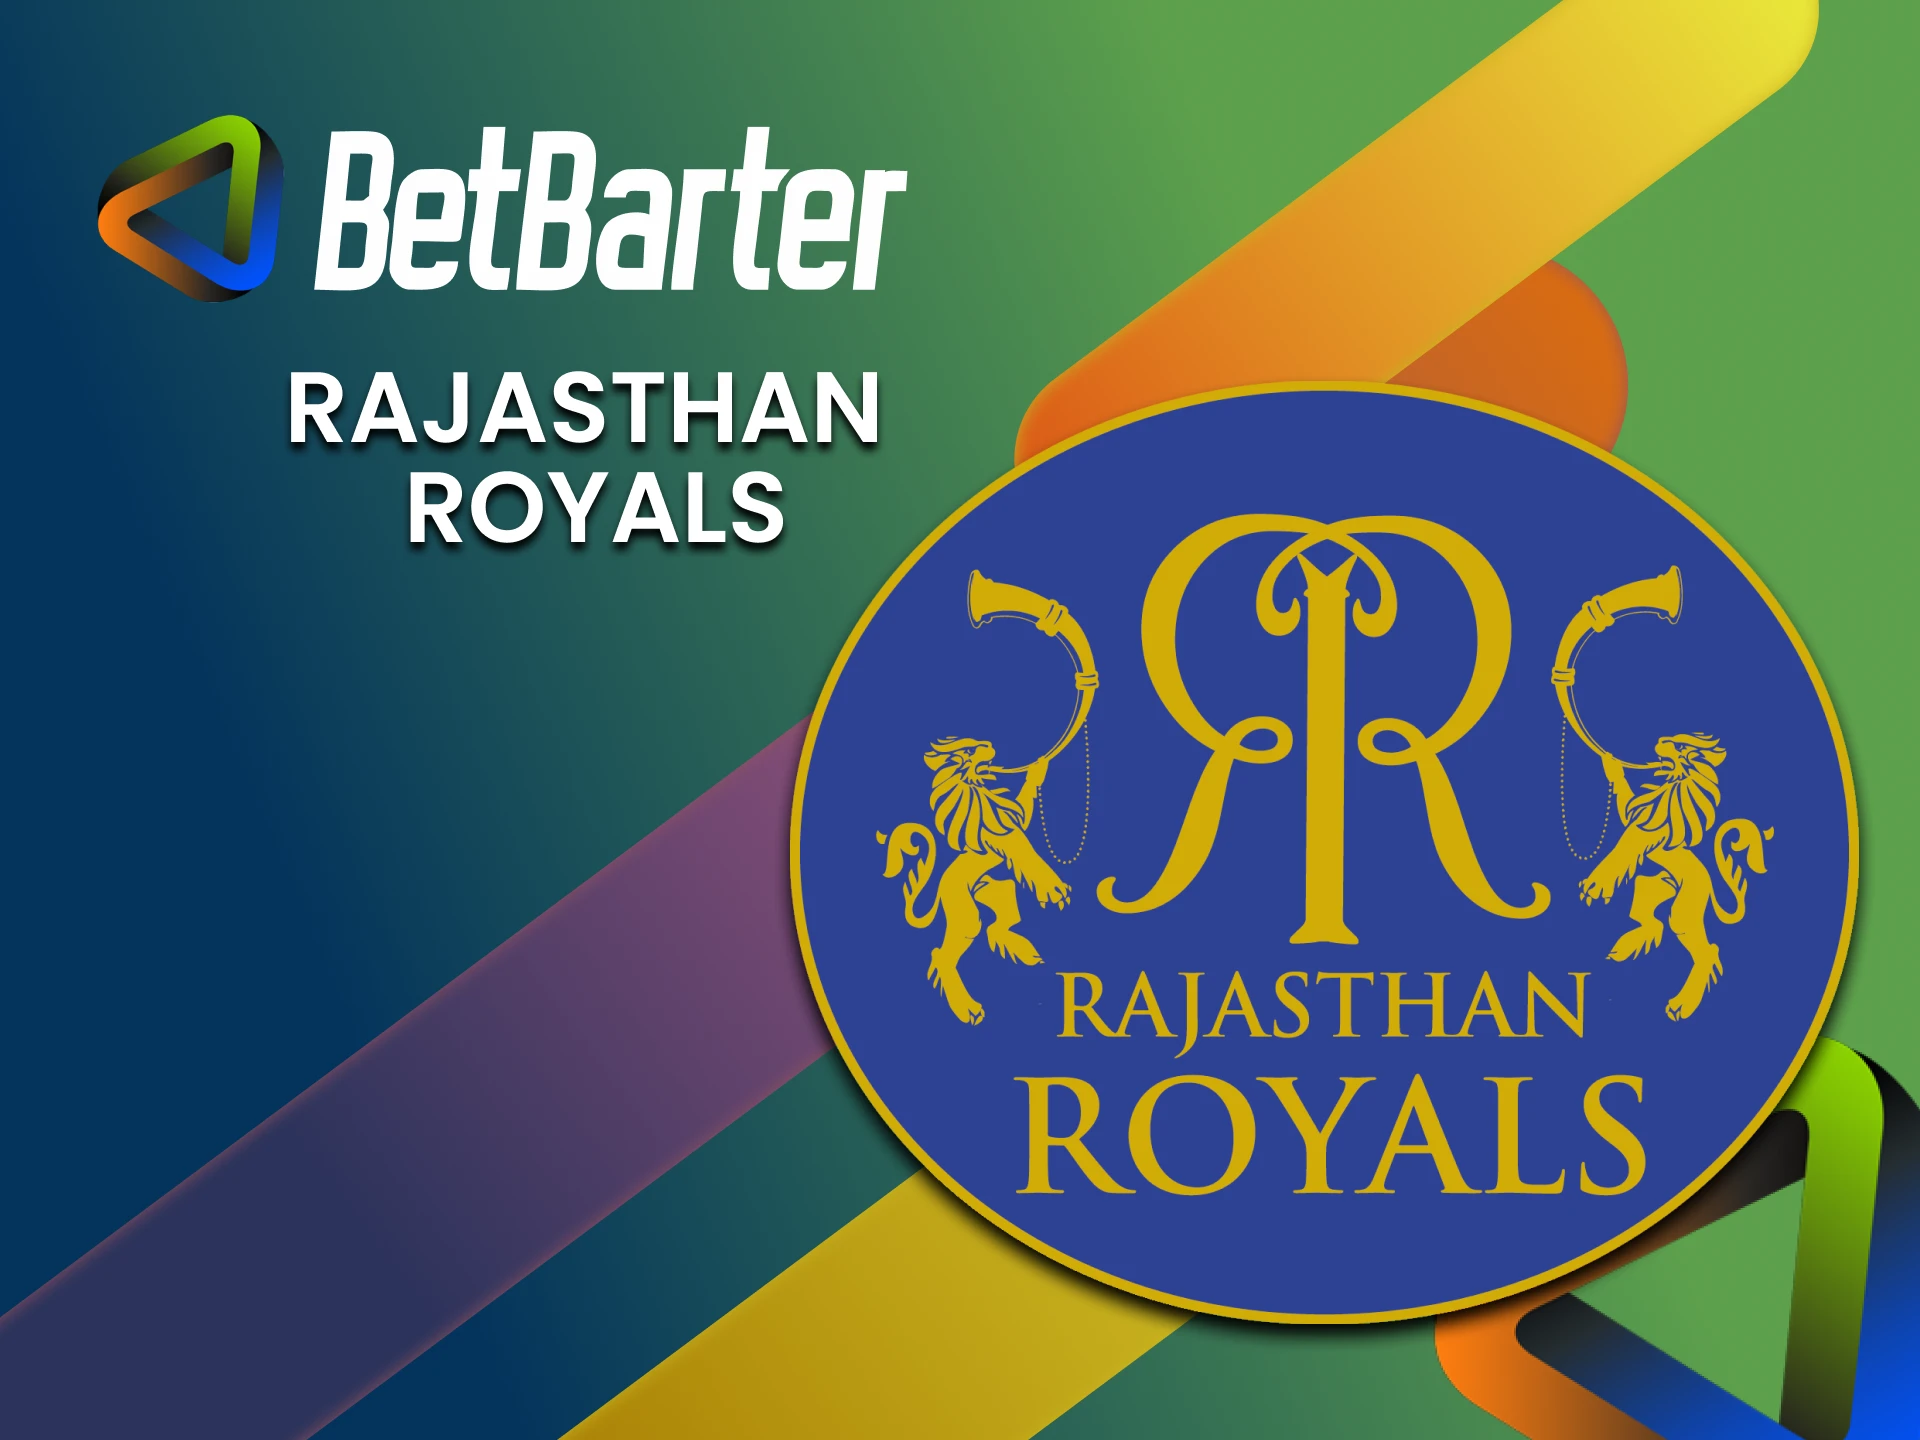 Bet on Rajasthan Royals in the IPL league from BetBarter.